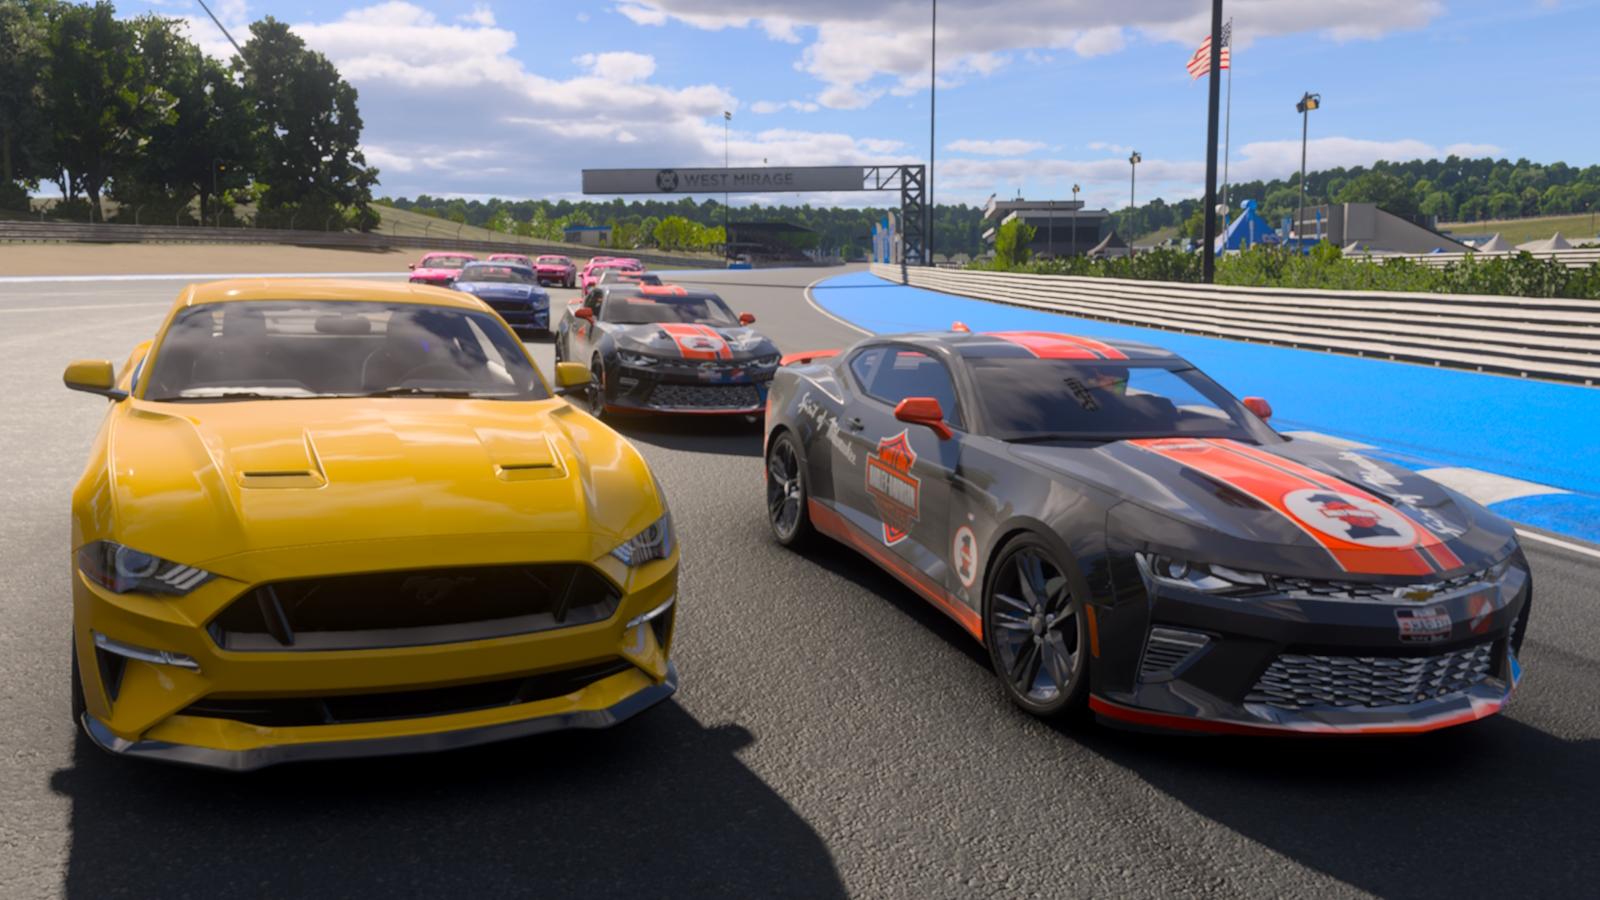 FM8 is one of the lowest rated Forza games in the history of the franchise  : r/forza